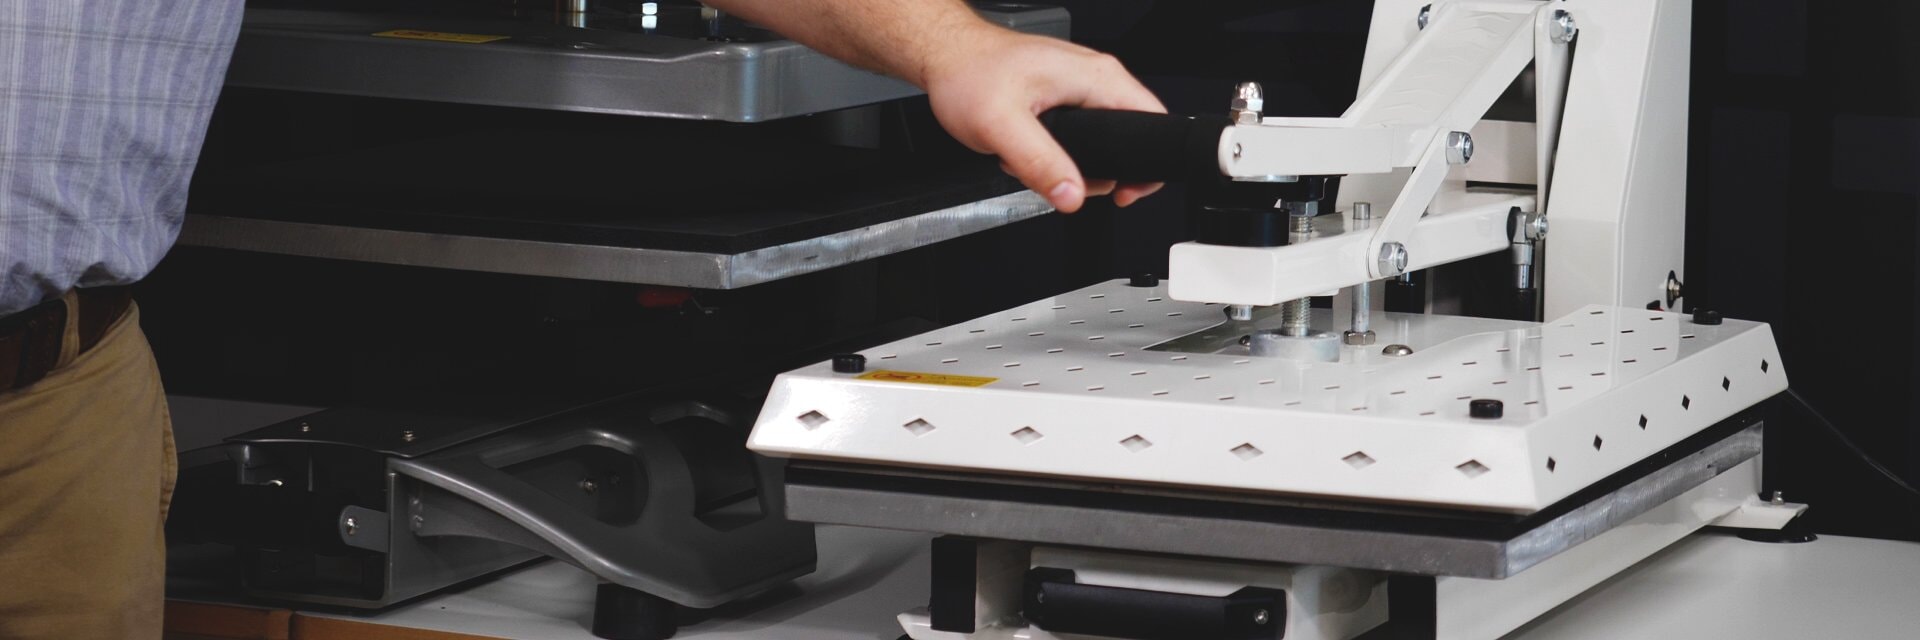 Screen Printing vs. Heat Press: Which is Better & Why - Press